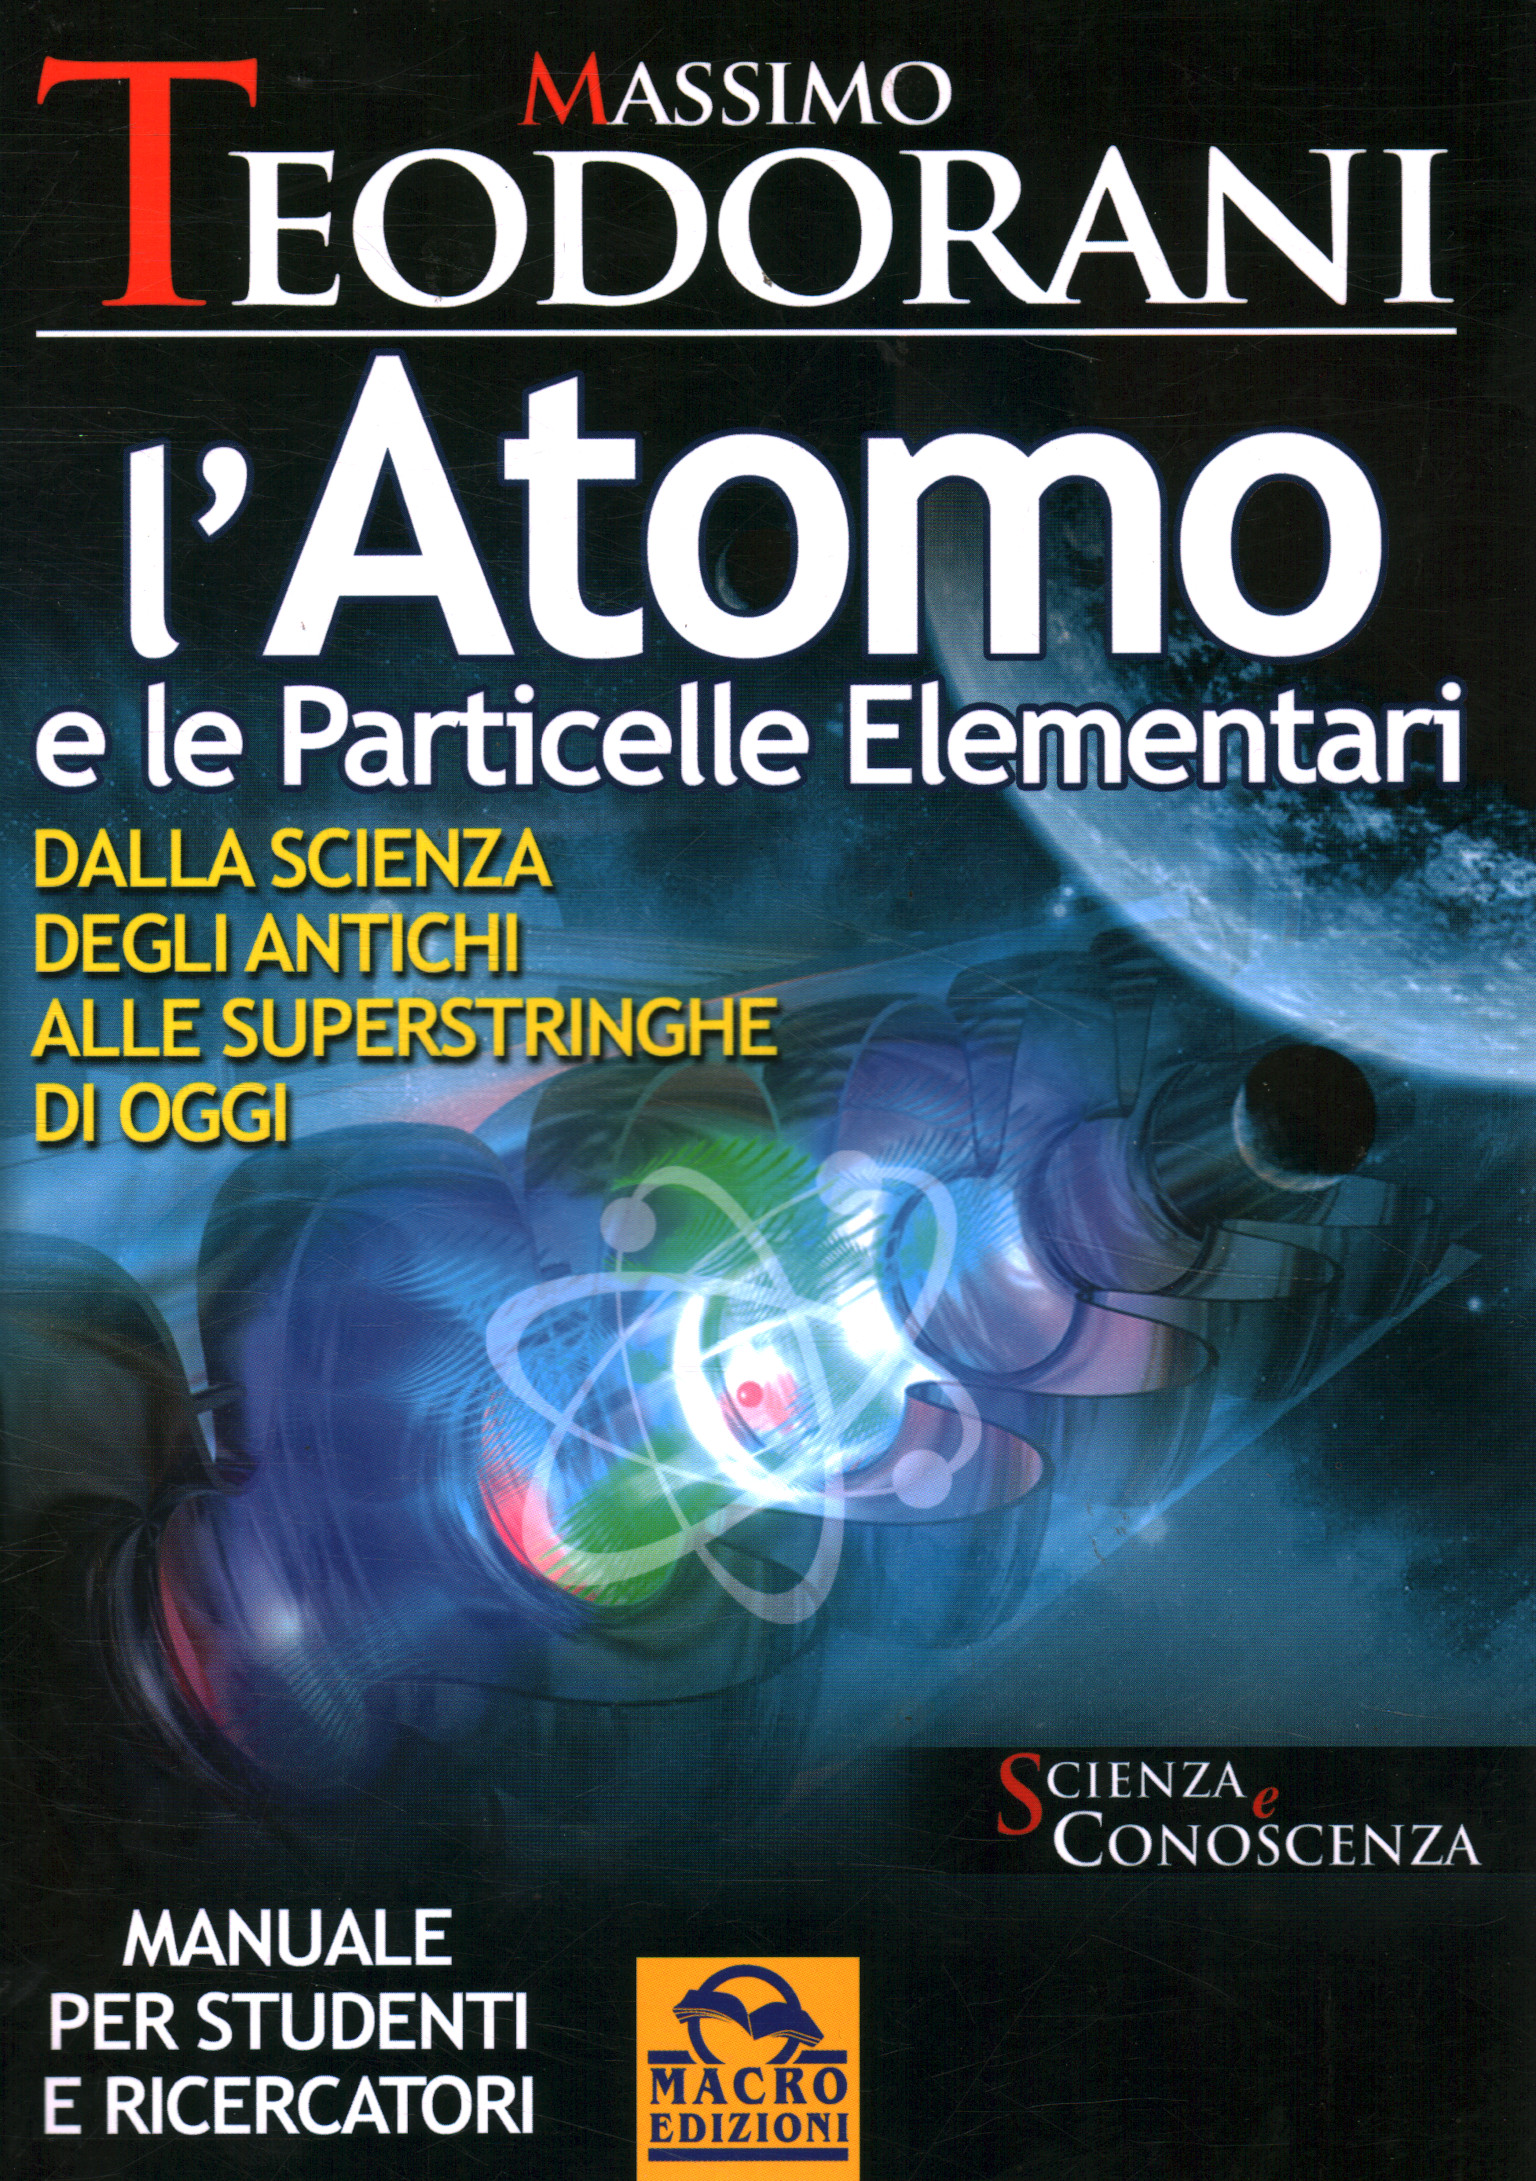 The atom and the element particles